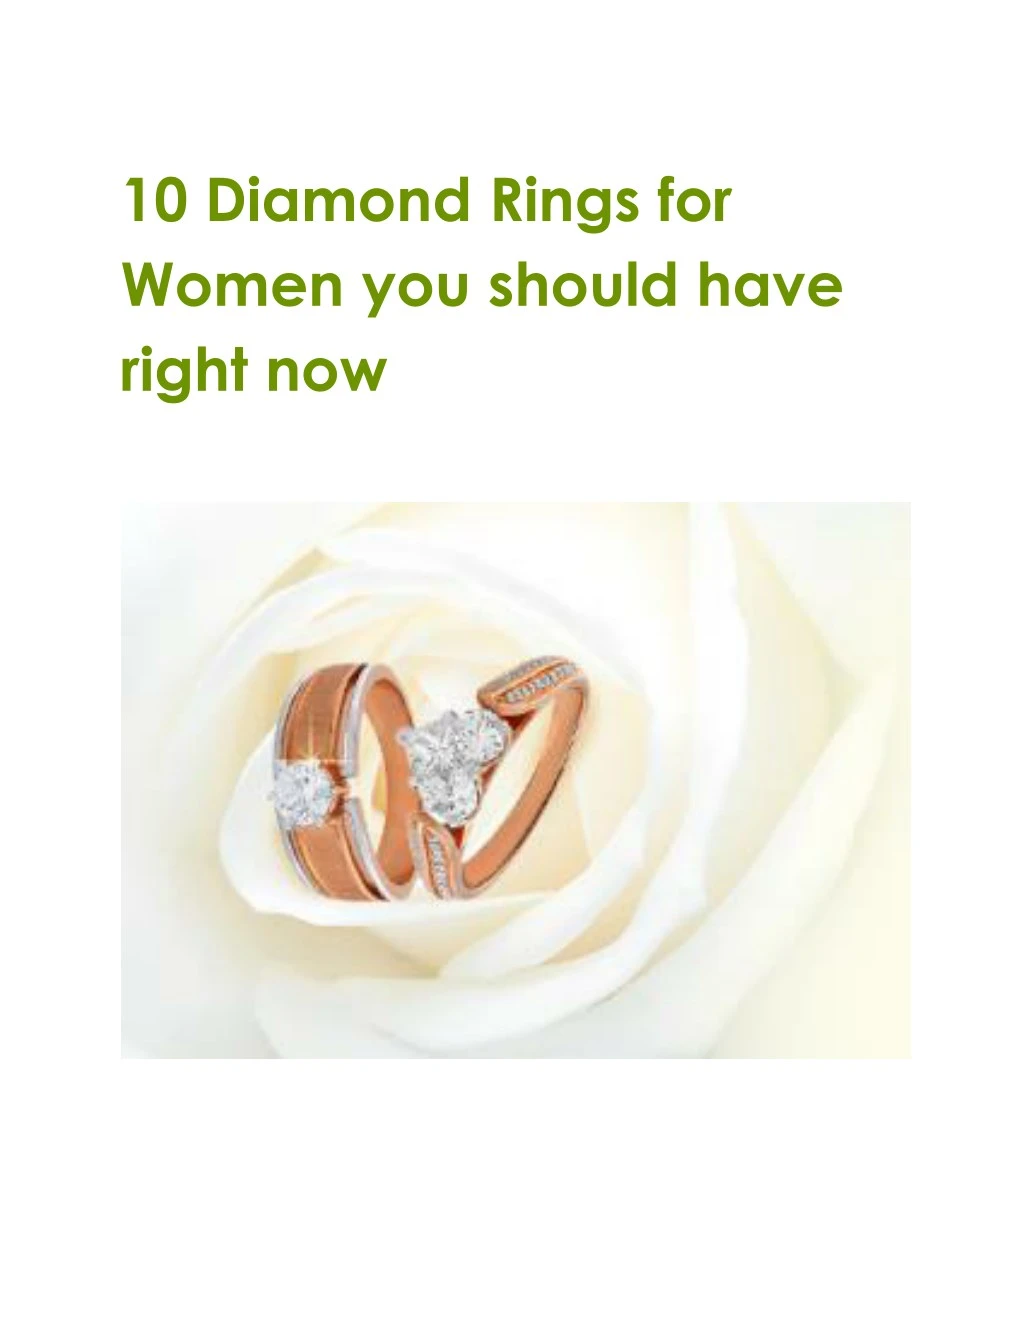 10 diamond rings for women you should have right